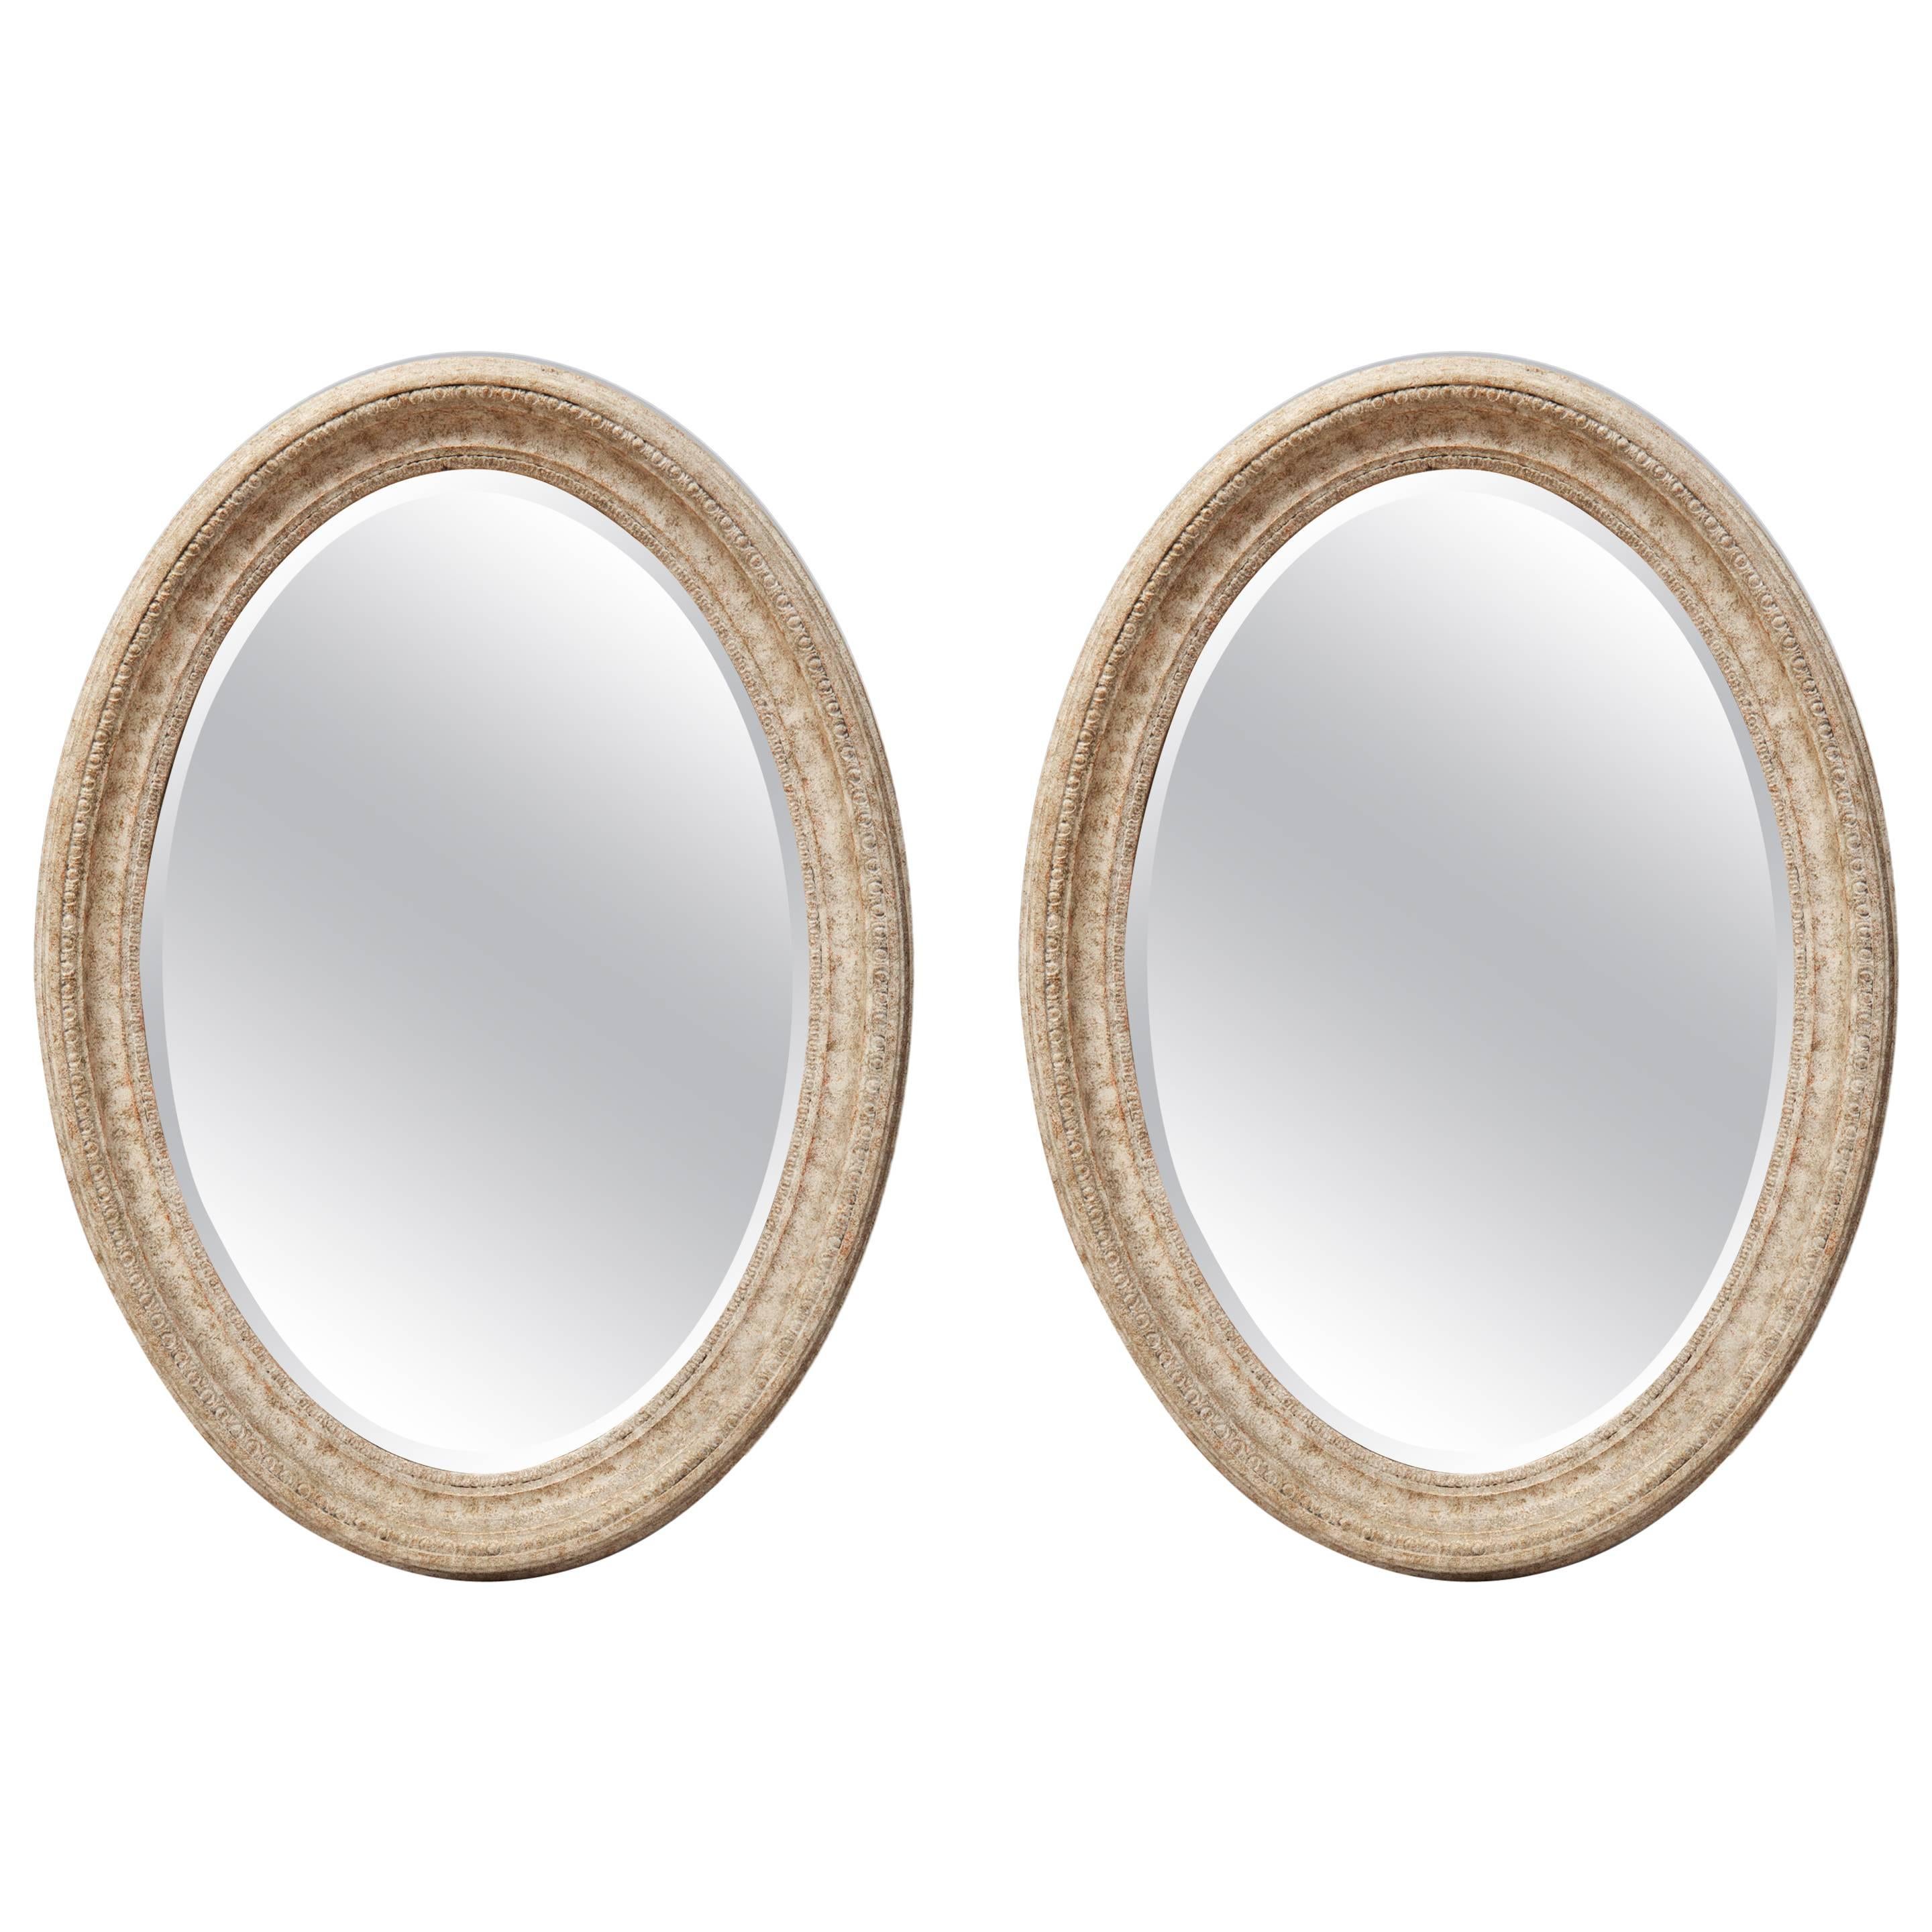 Pair of English Oval Painted Mirrors